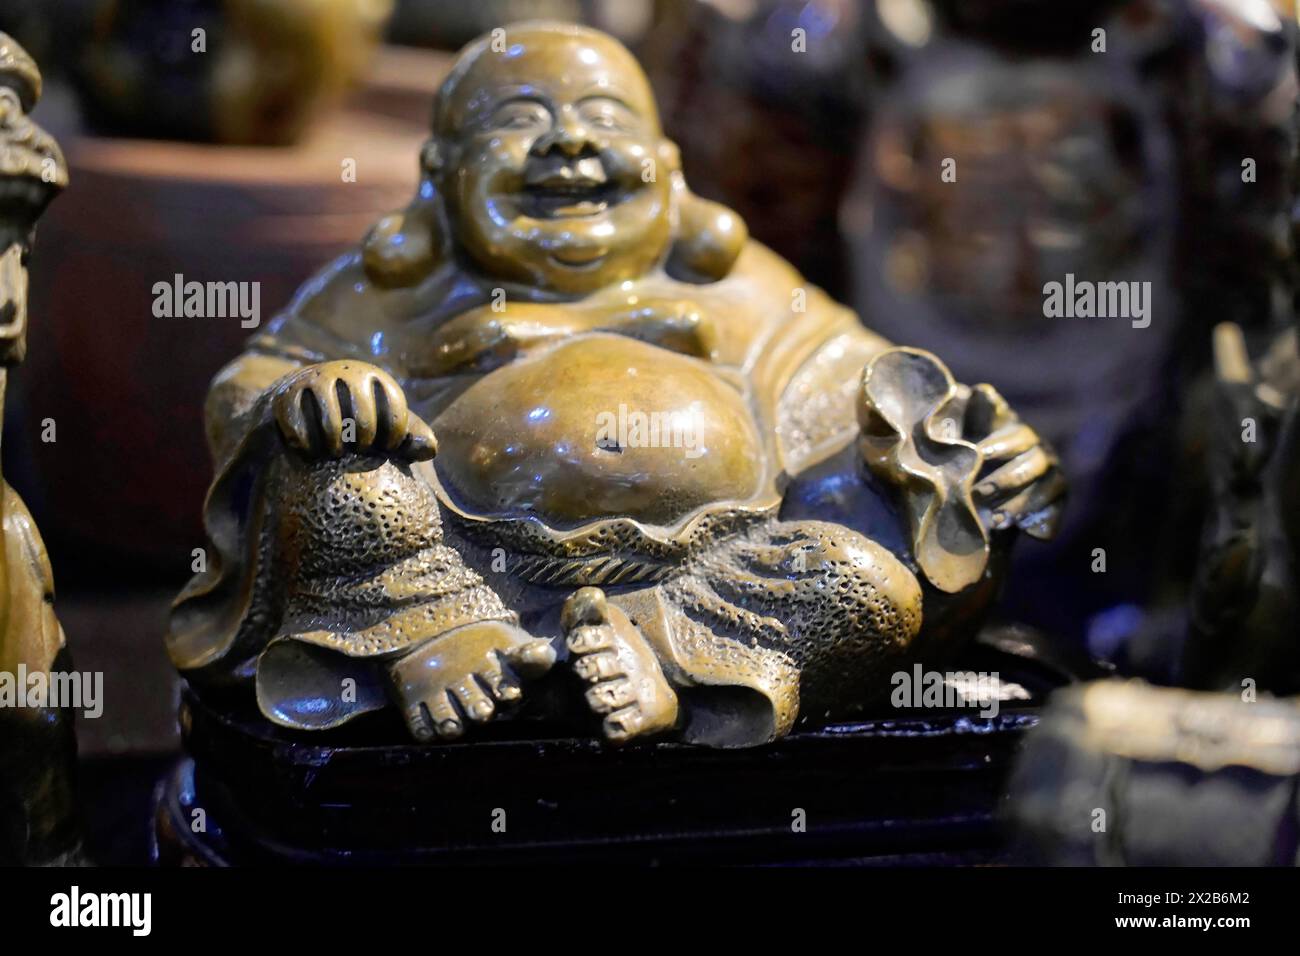 Xian, Shaanxi Province, China, Asia, Figure of a laughing Buddha, a symbol of happiness and prosperity in Asian culture, Xian, Shaanxi Province, China Stock Photo